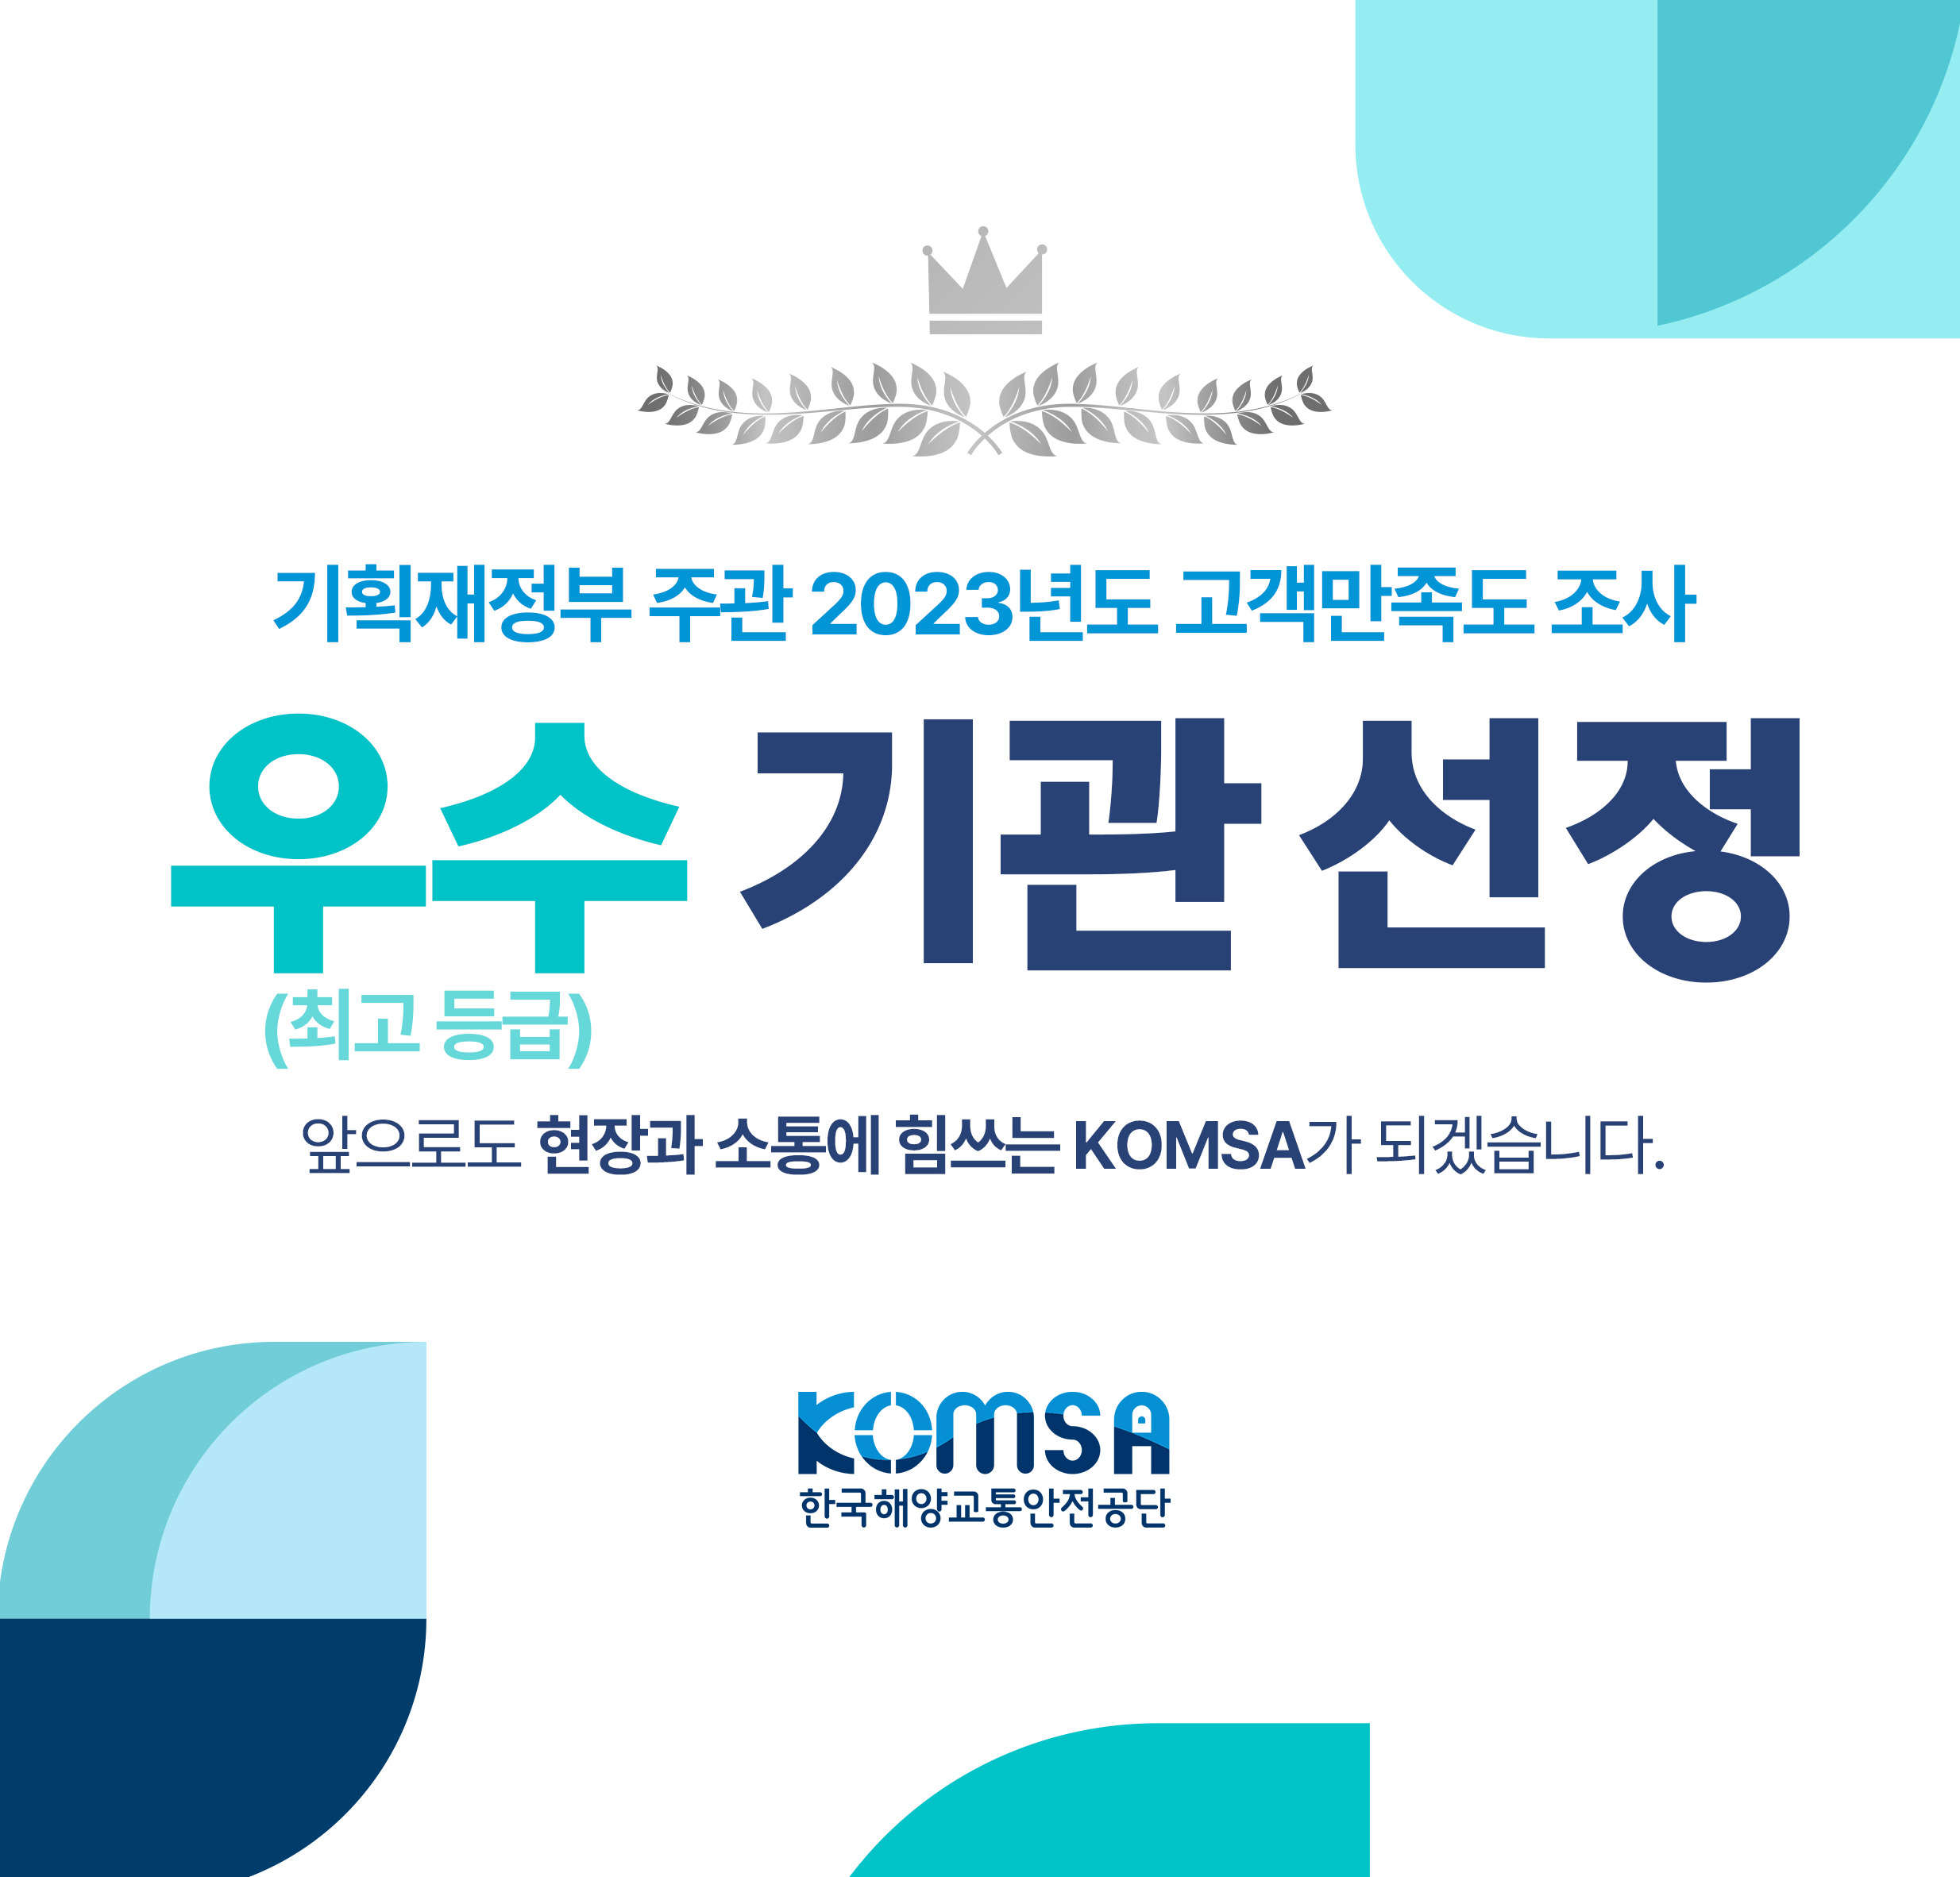 https://www.komsa.or.kr/kor/;jsessionid=4AAA019BF8CB62A84213070643A7A2A9